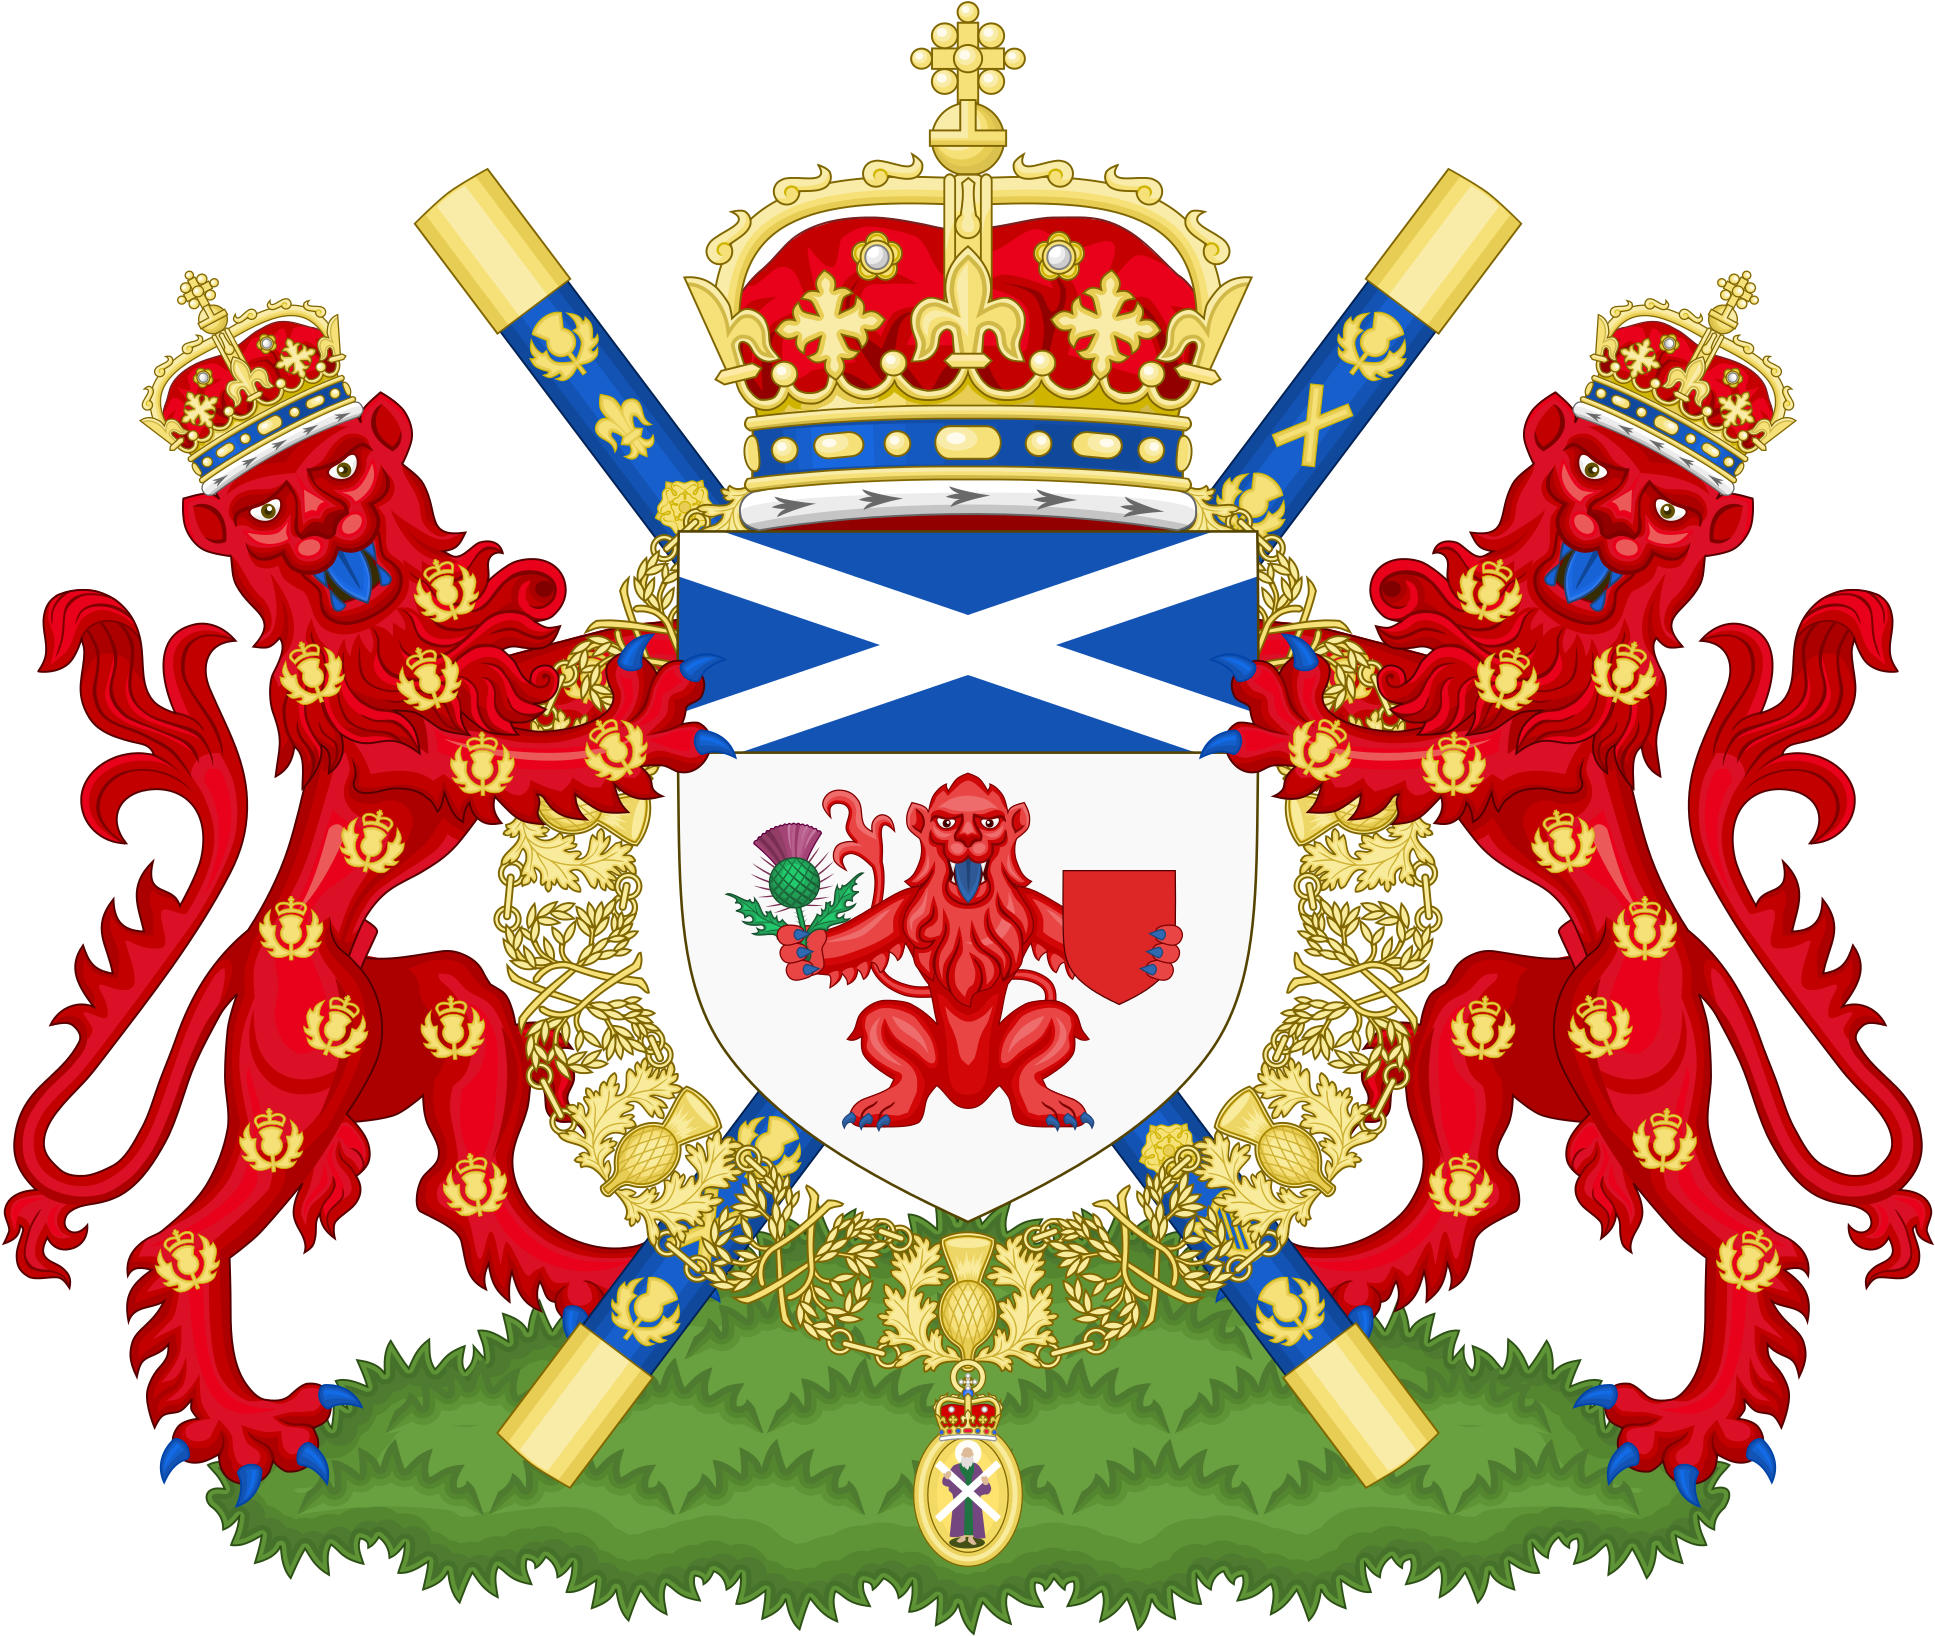 A Coat Of Arms With Red Lions And Blue And White Stripes